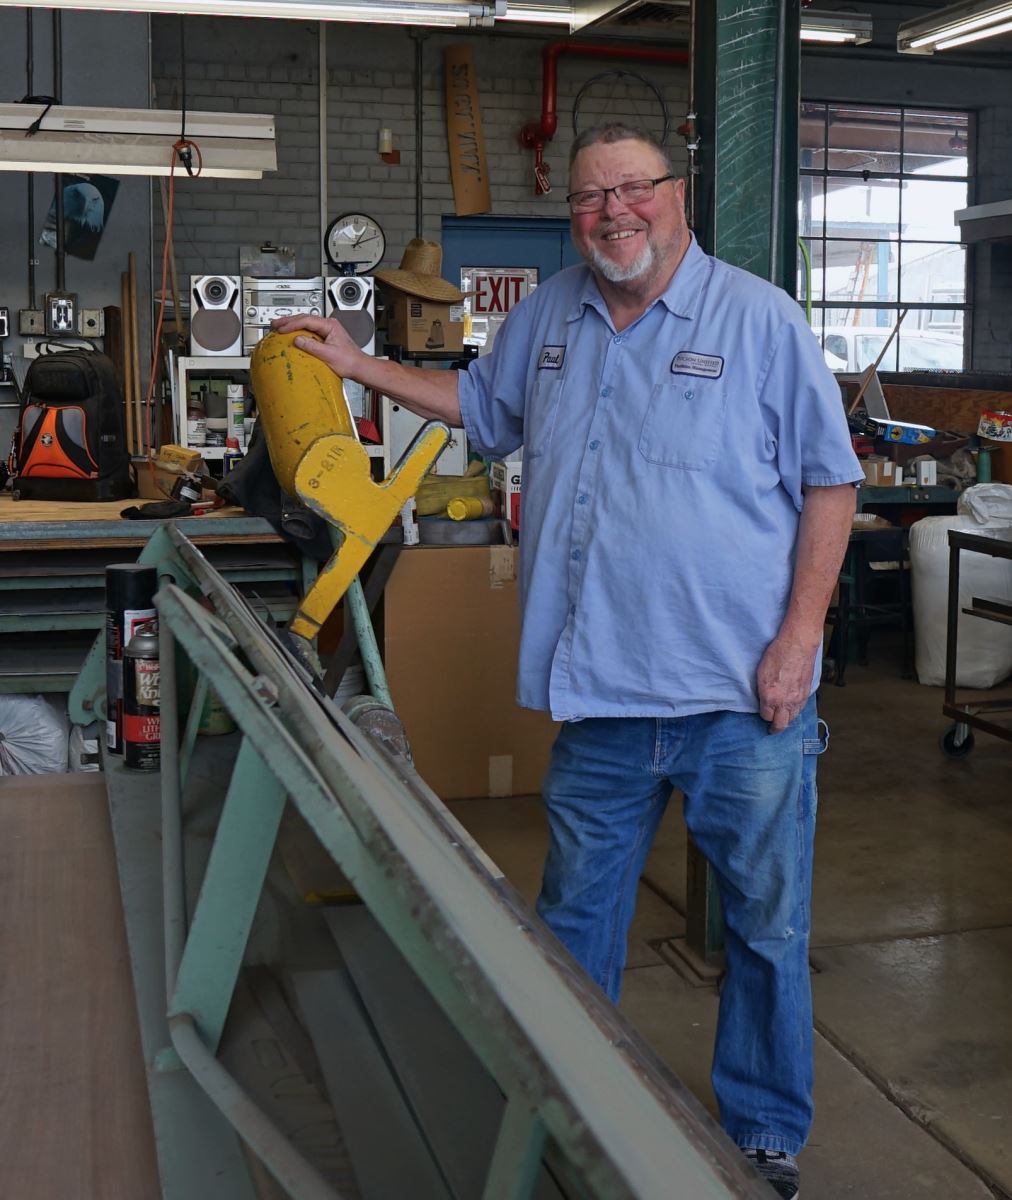 W. Paul Riggleman stands next to the sheet metal equipment he works with daily.